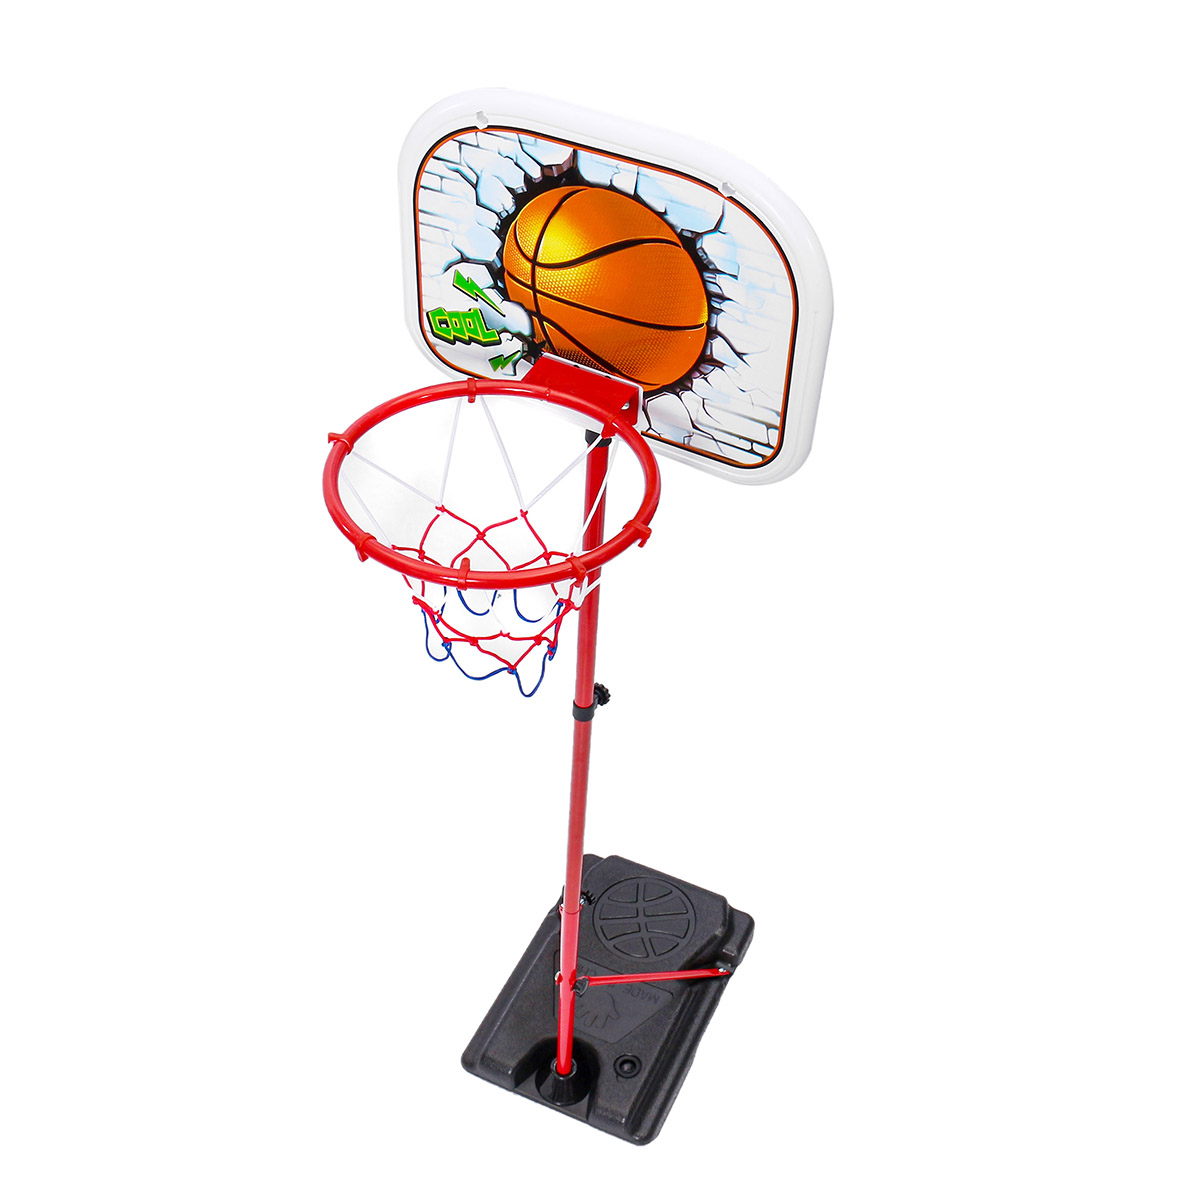 Liftable-Tire-Iron-Frame-Basketball-Stand-Childrens-Outdoor-Indoor-Sports-Shooting-Frame-Toys-1636599-1